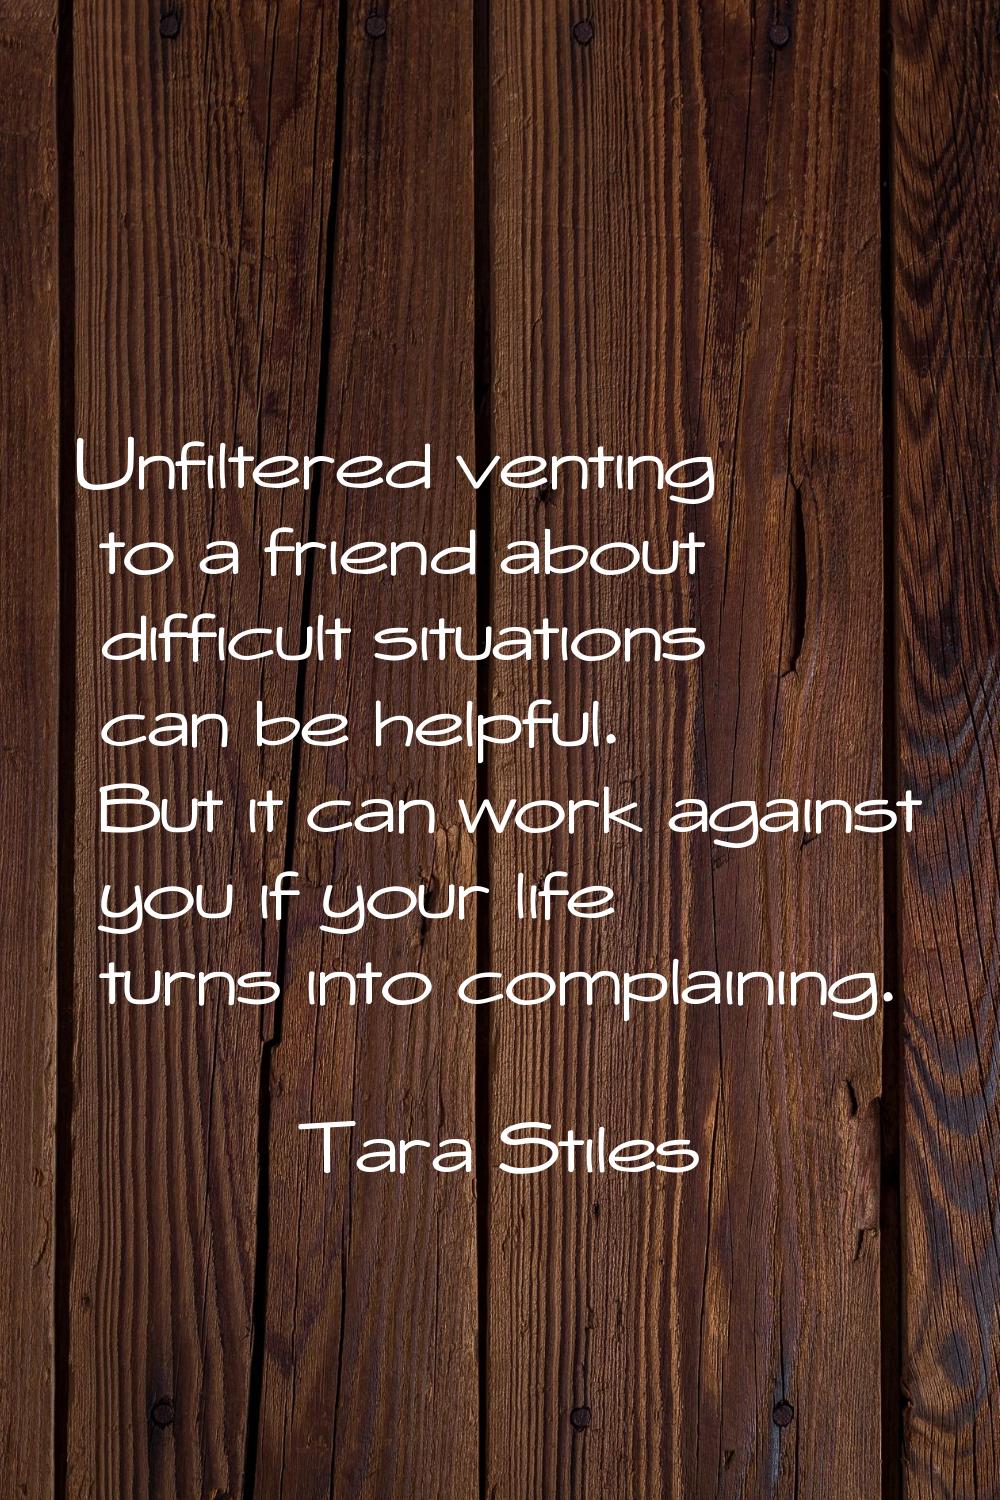 Unfiltered venting to a friend about difficult situations can be helpful. But it can work against y